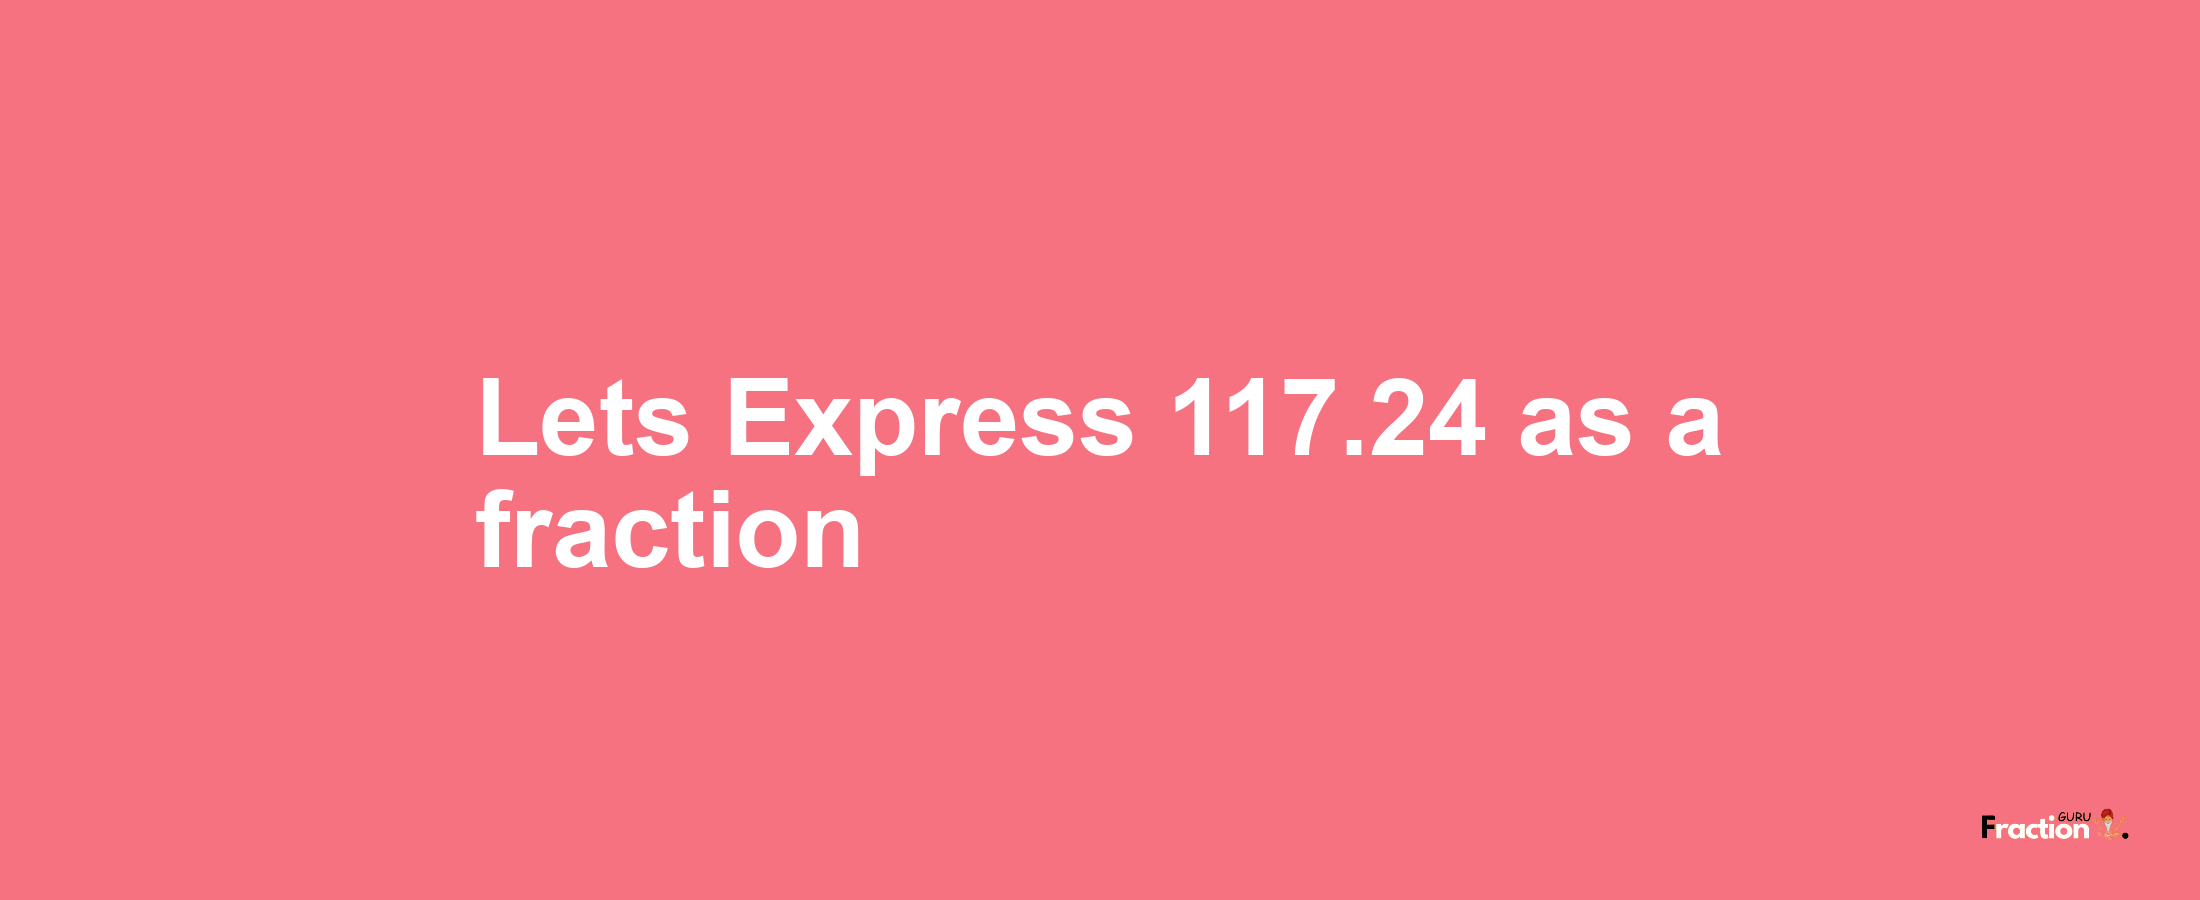 Lets Express 117.24 as afraction